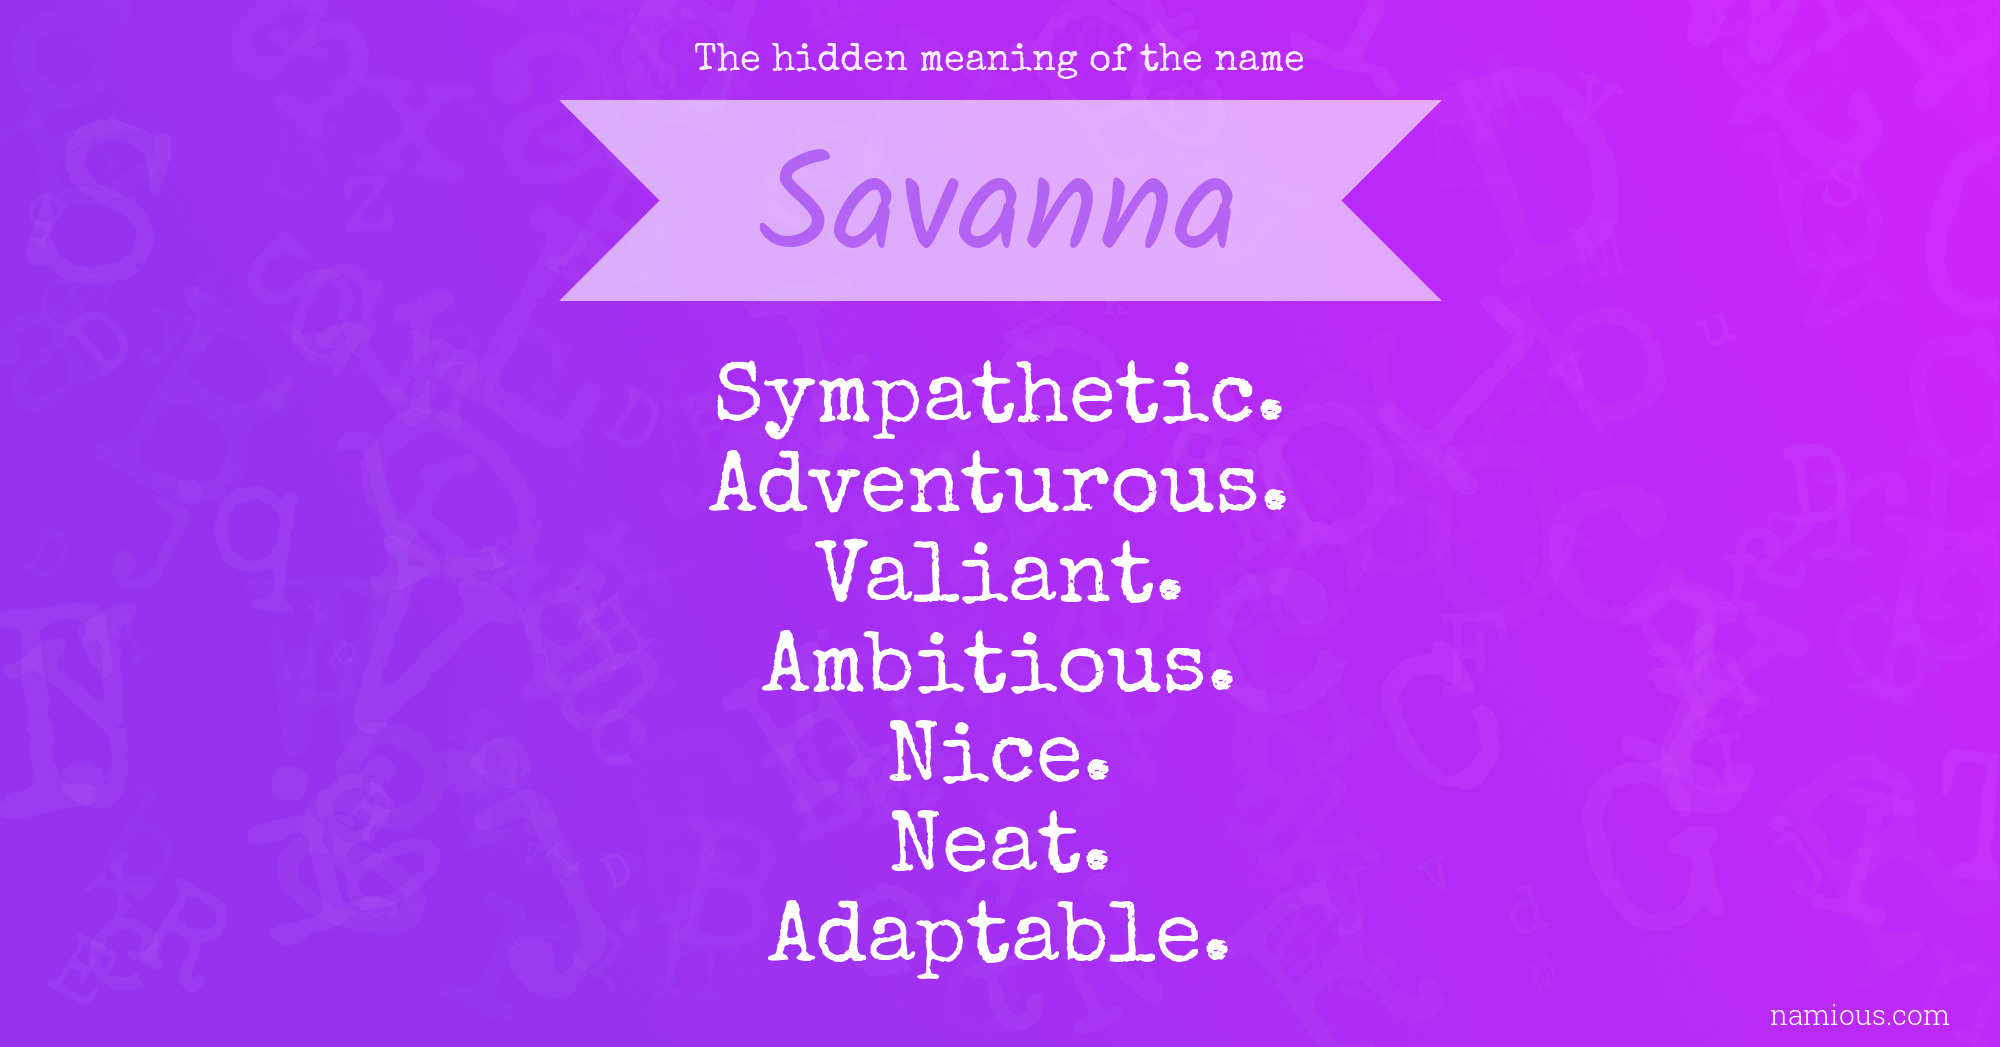 The hidden meaning of the name Savanna